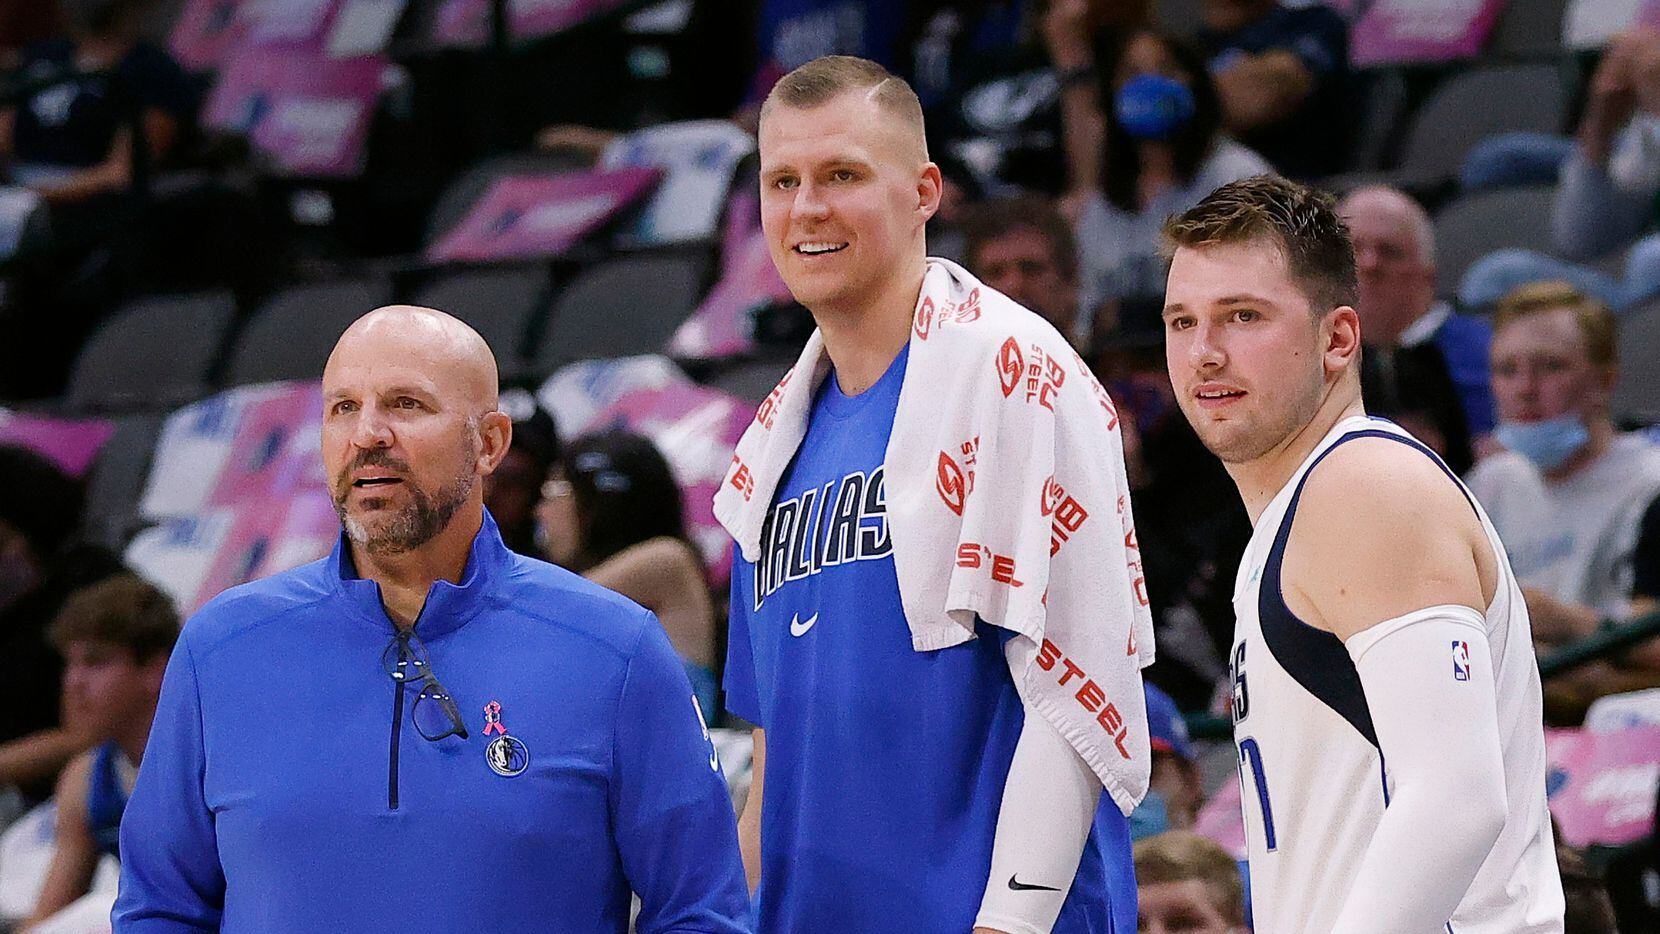 Dallas Mavericks head coach Jason Kidd, center Kristaps Porzingis (center) and guard Luka Doncic watch from the scorers table as the team competes against the Utah Jazz in the first half at the American Airlines Center in Dallas, Wednesday, October 6, 2021.